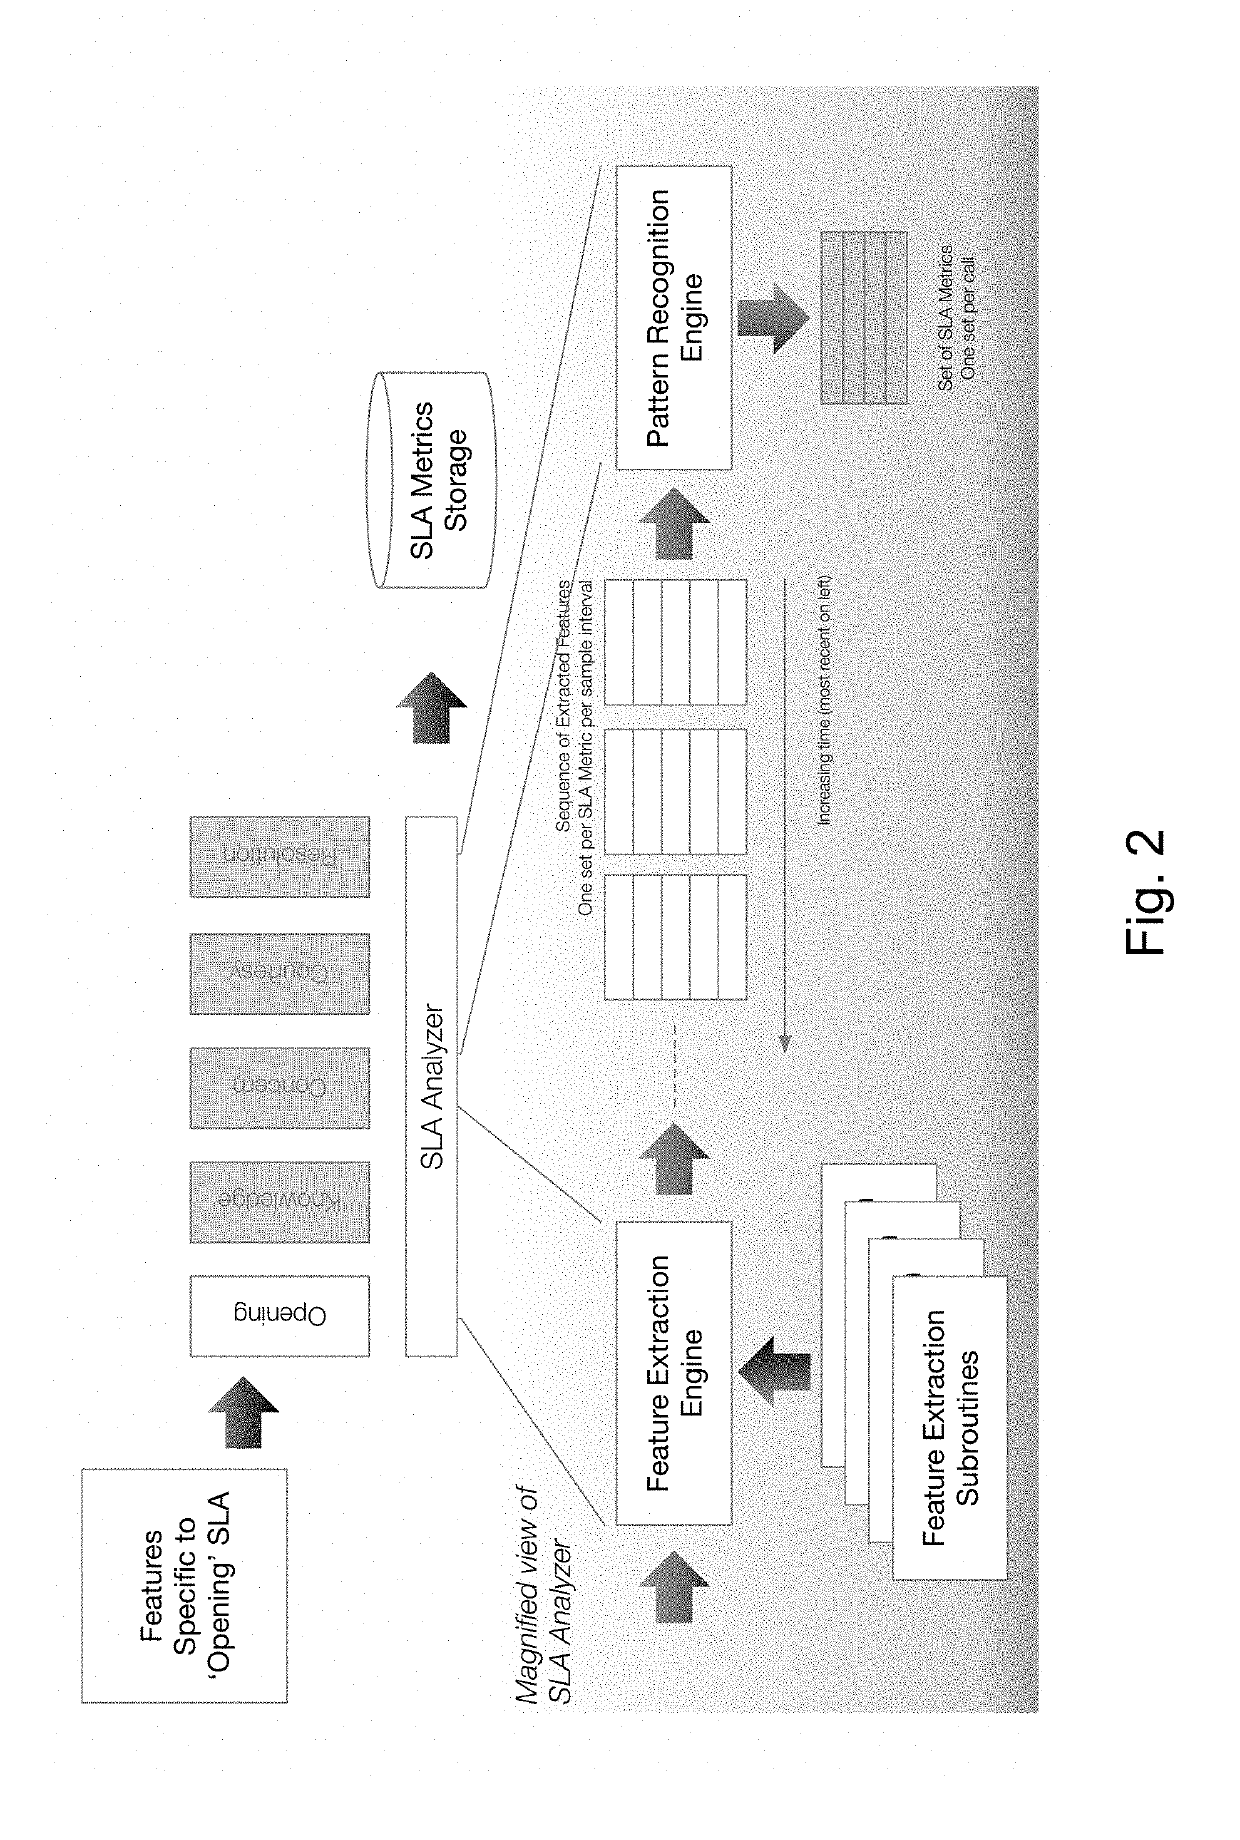 System and method to automatically monitor service level agreement compliance in call centers